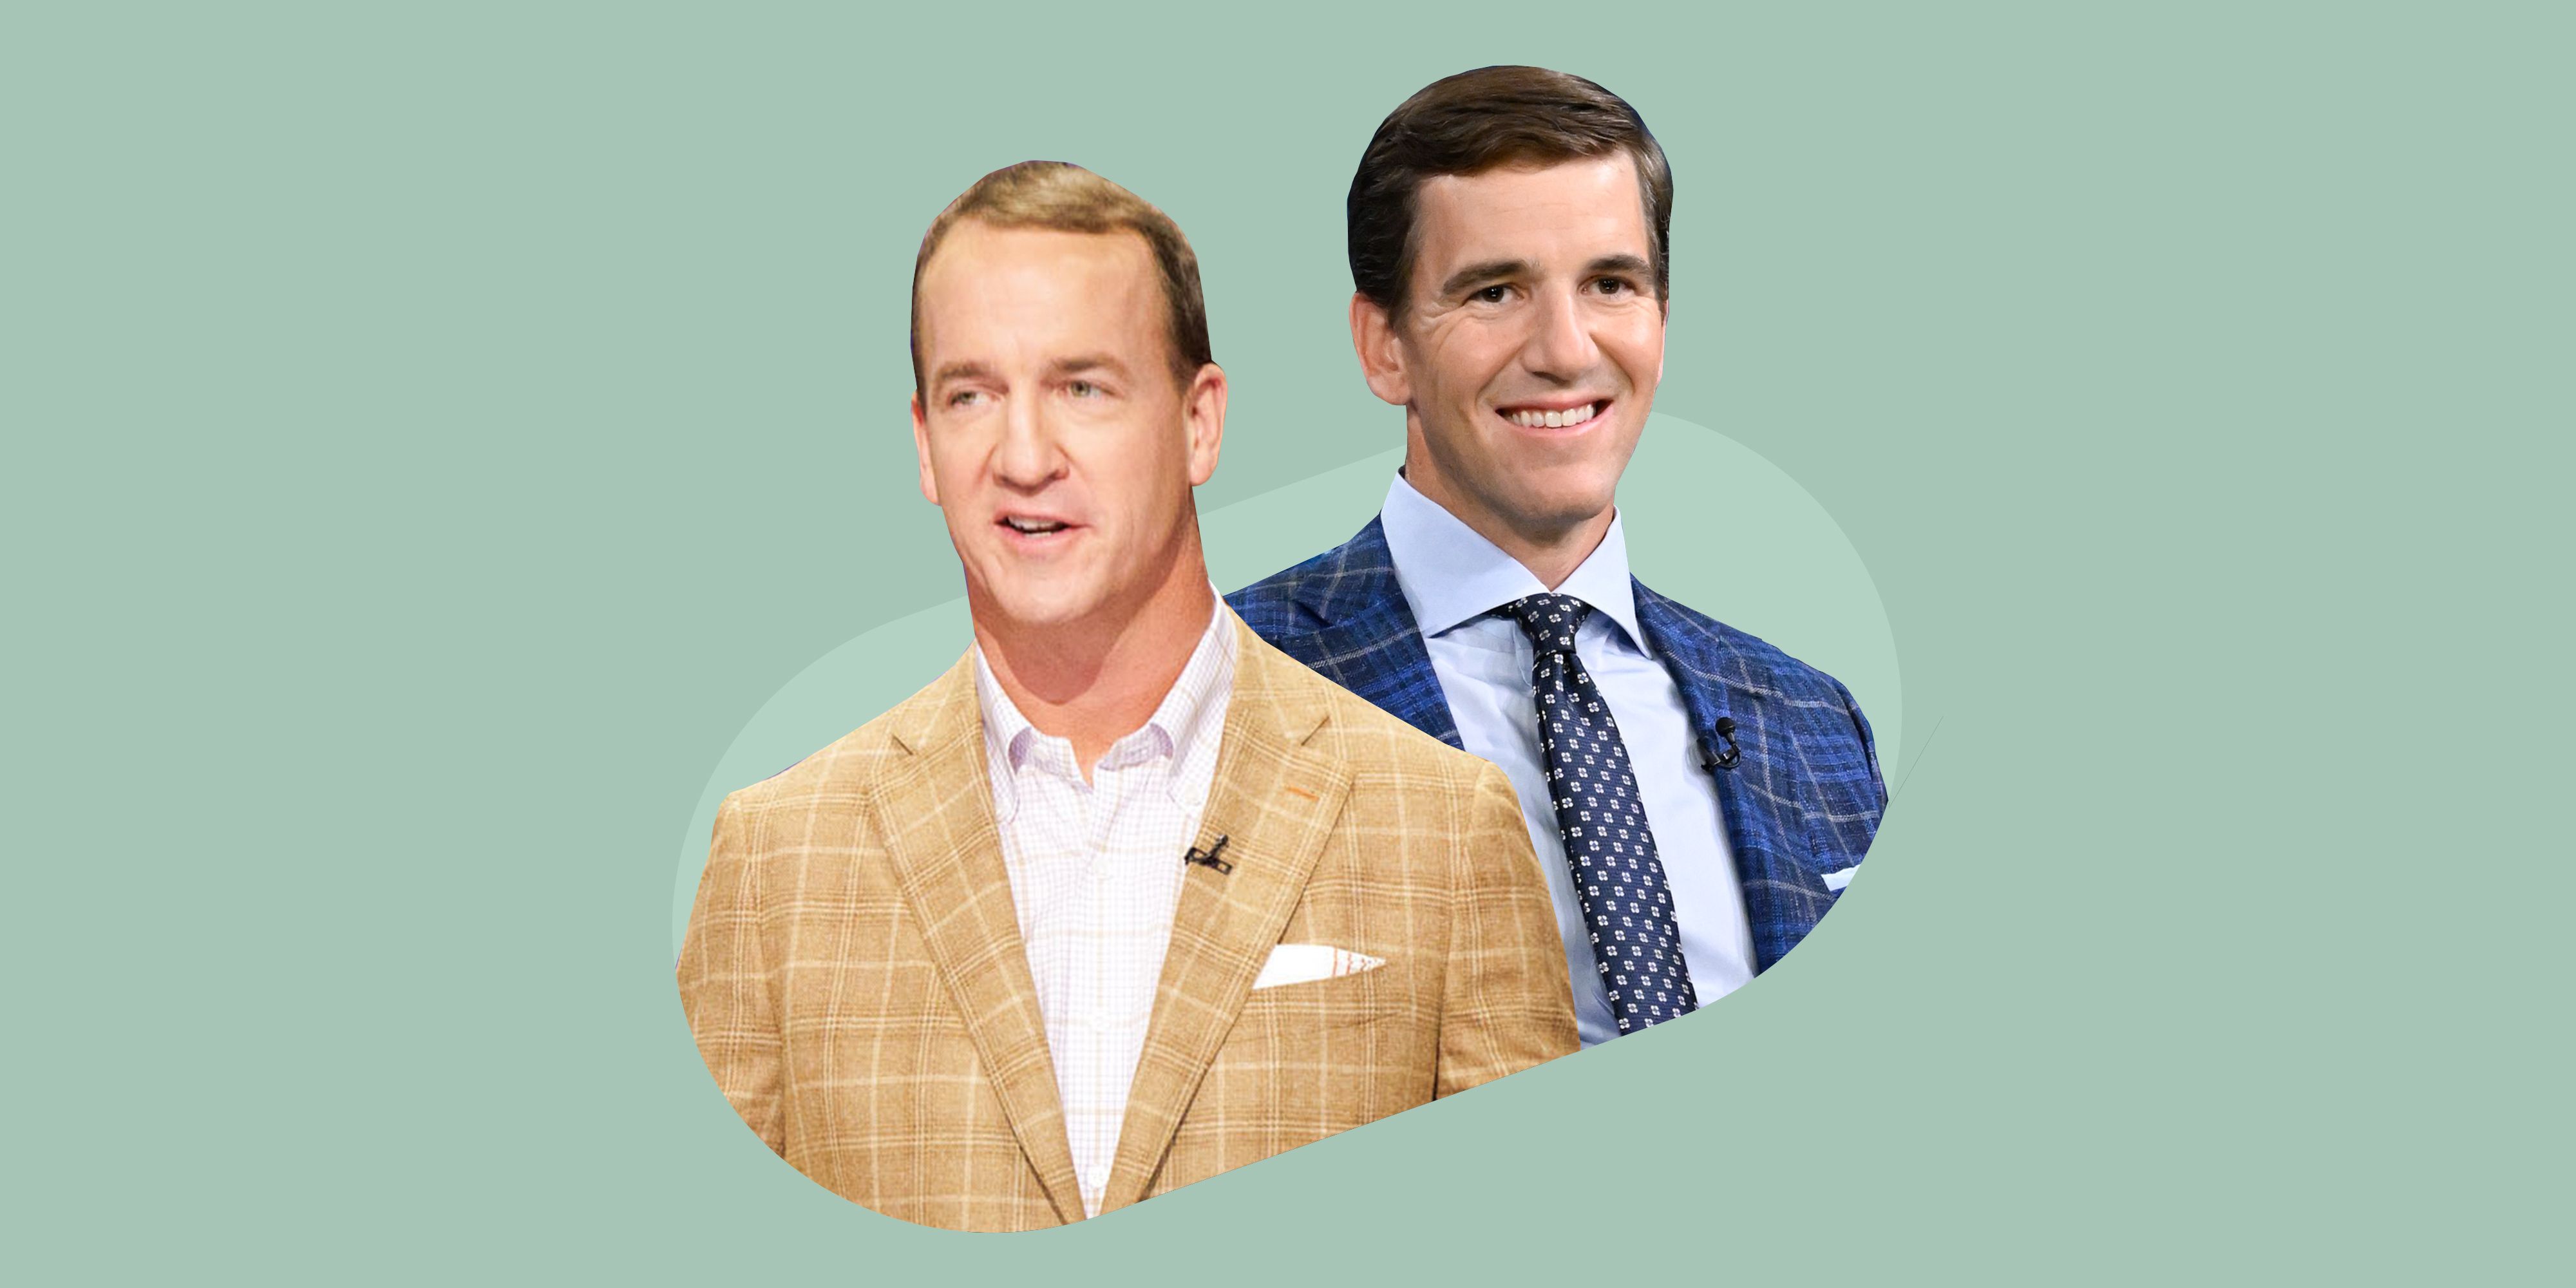 How Peyton and Eli Manning Made the ManningCast a Great TV Comedy